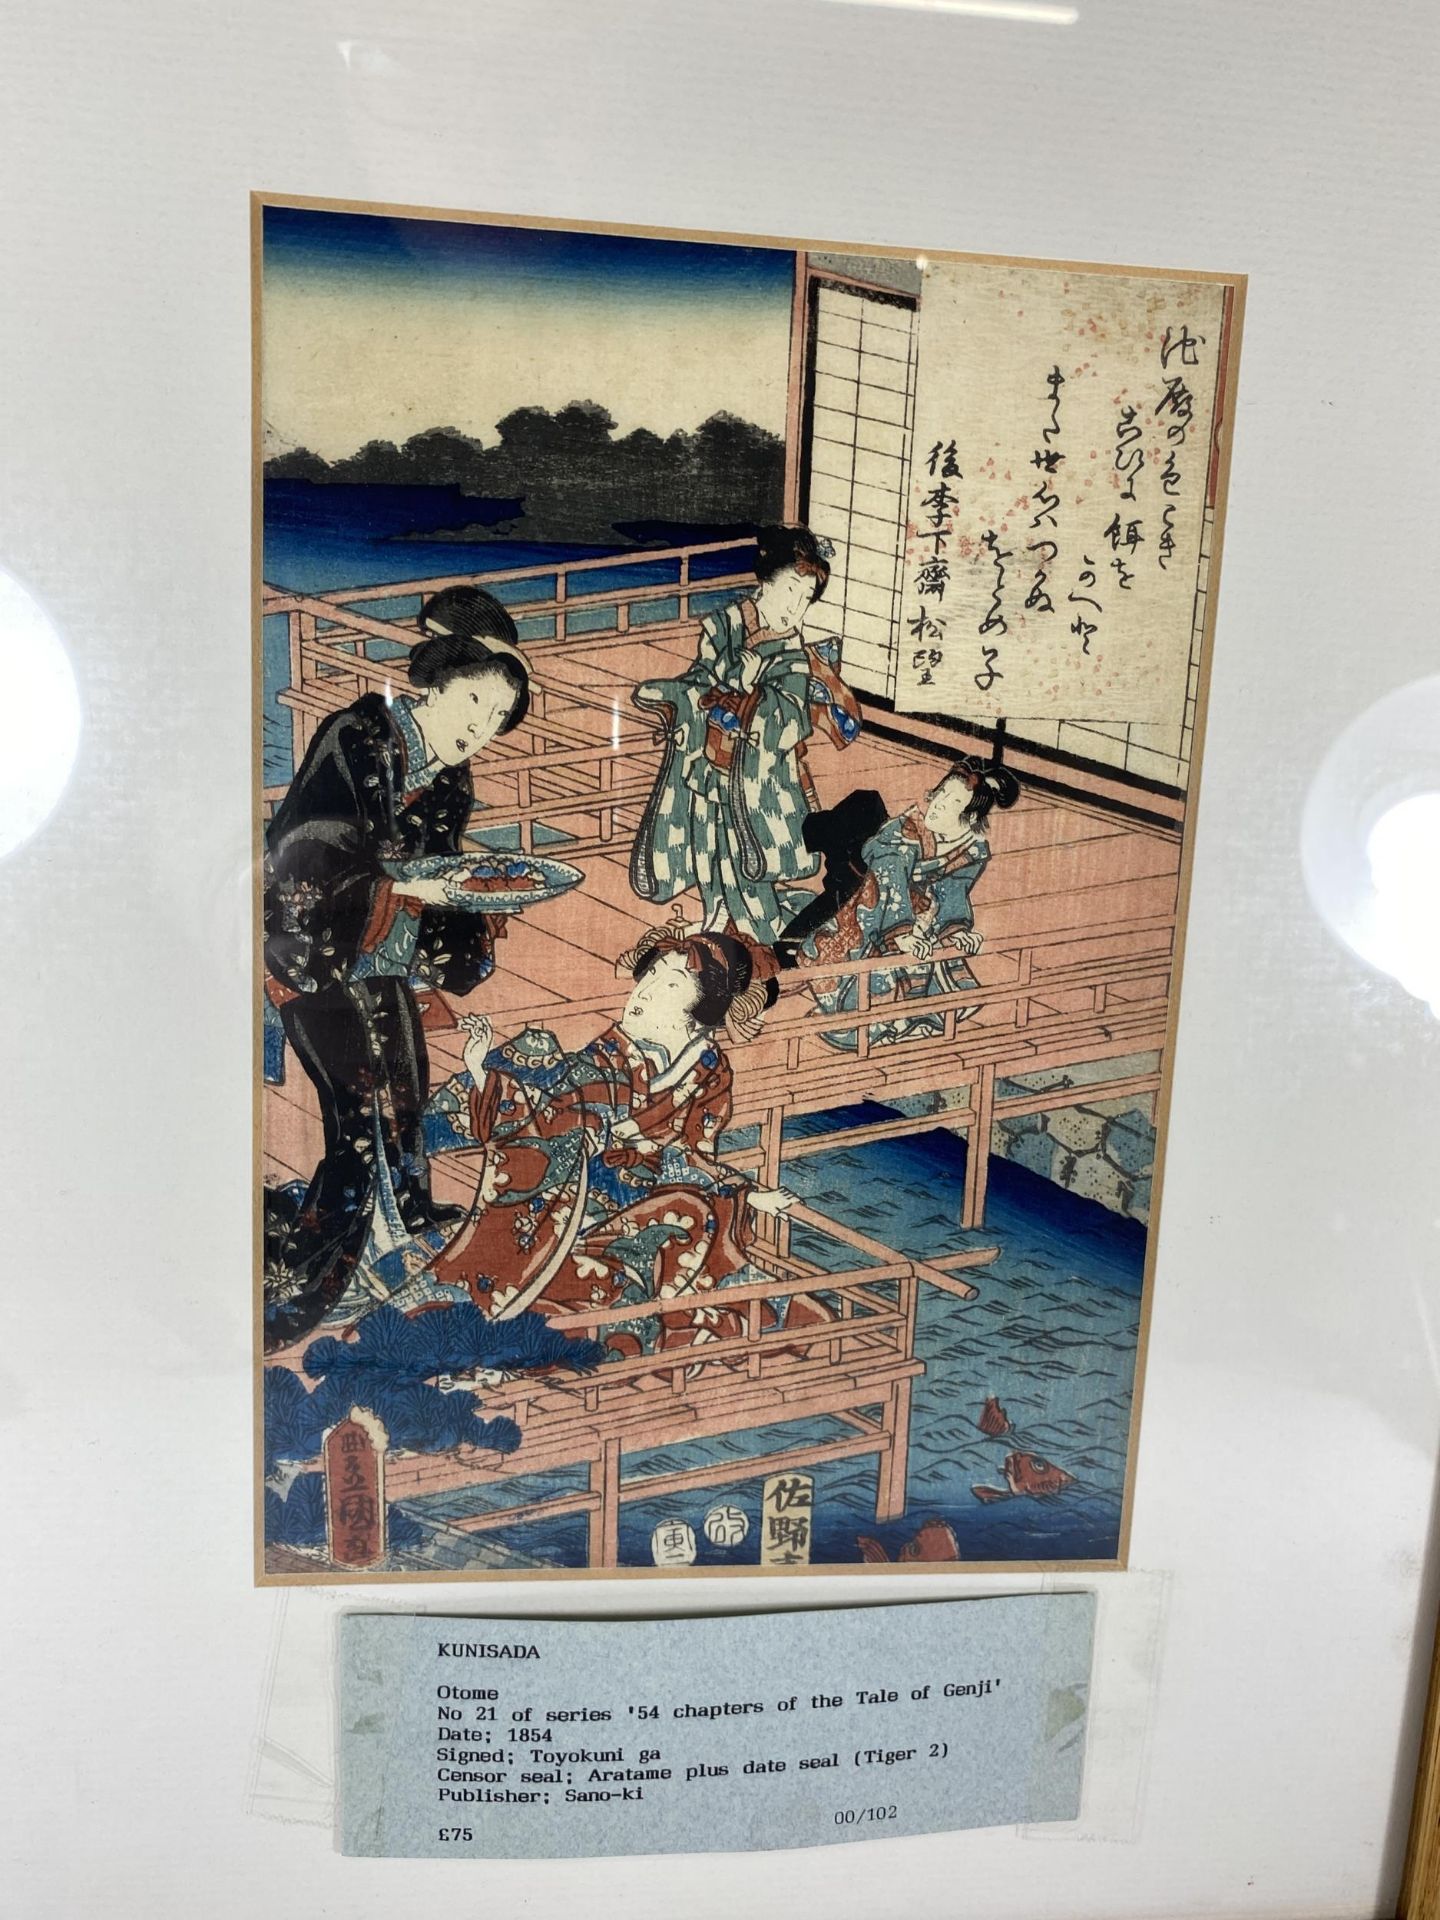 A KUNISADA JAPANESE WOODBLOCK FRAMED PRINT, NO.21 FROM '54 CHAPTERS OF THE TALE OF GENJI', 44 X 34CM - Image 2 of 4